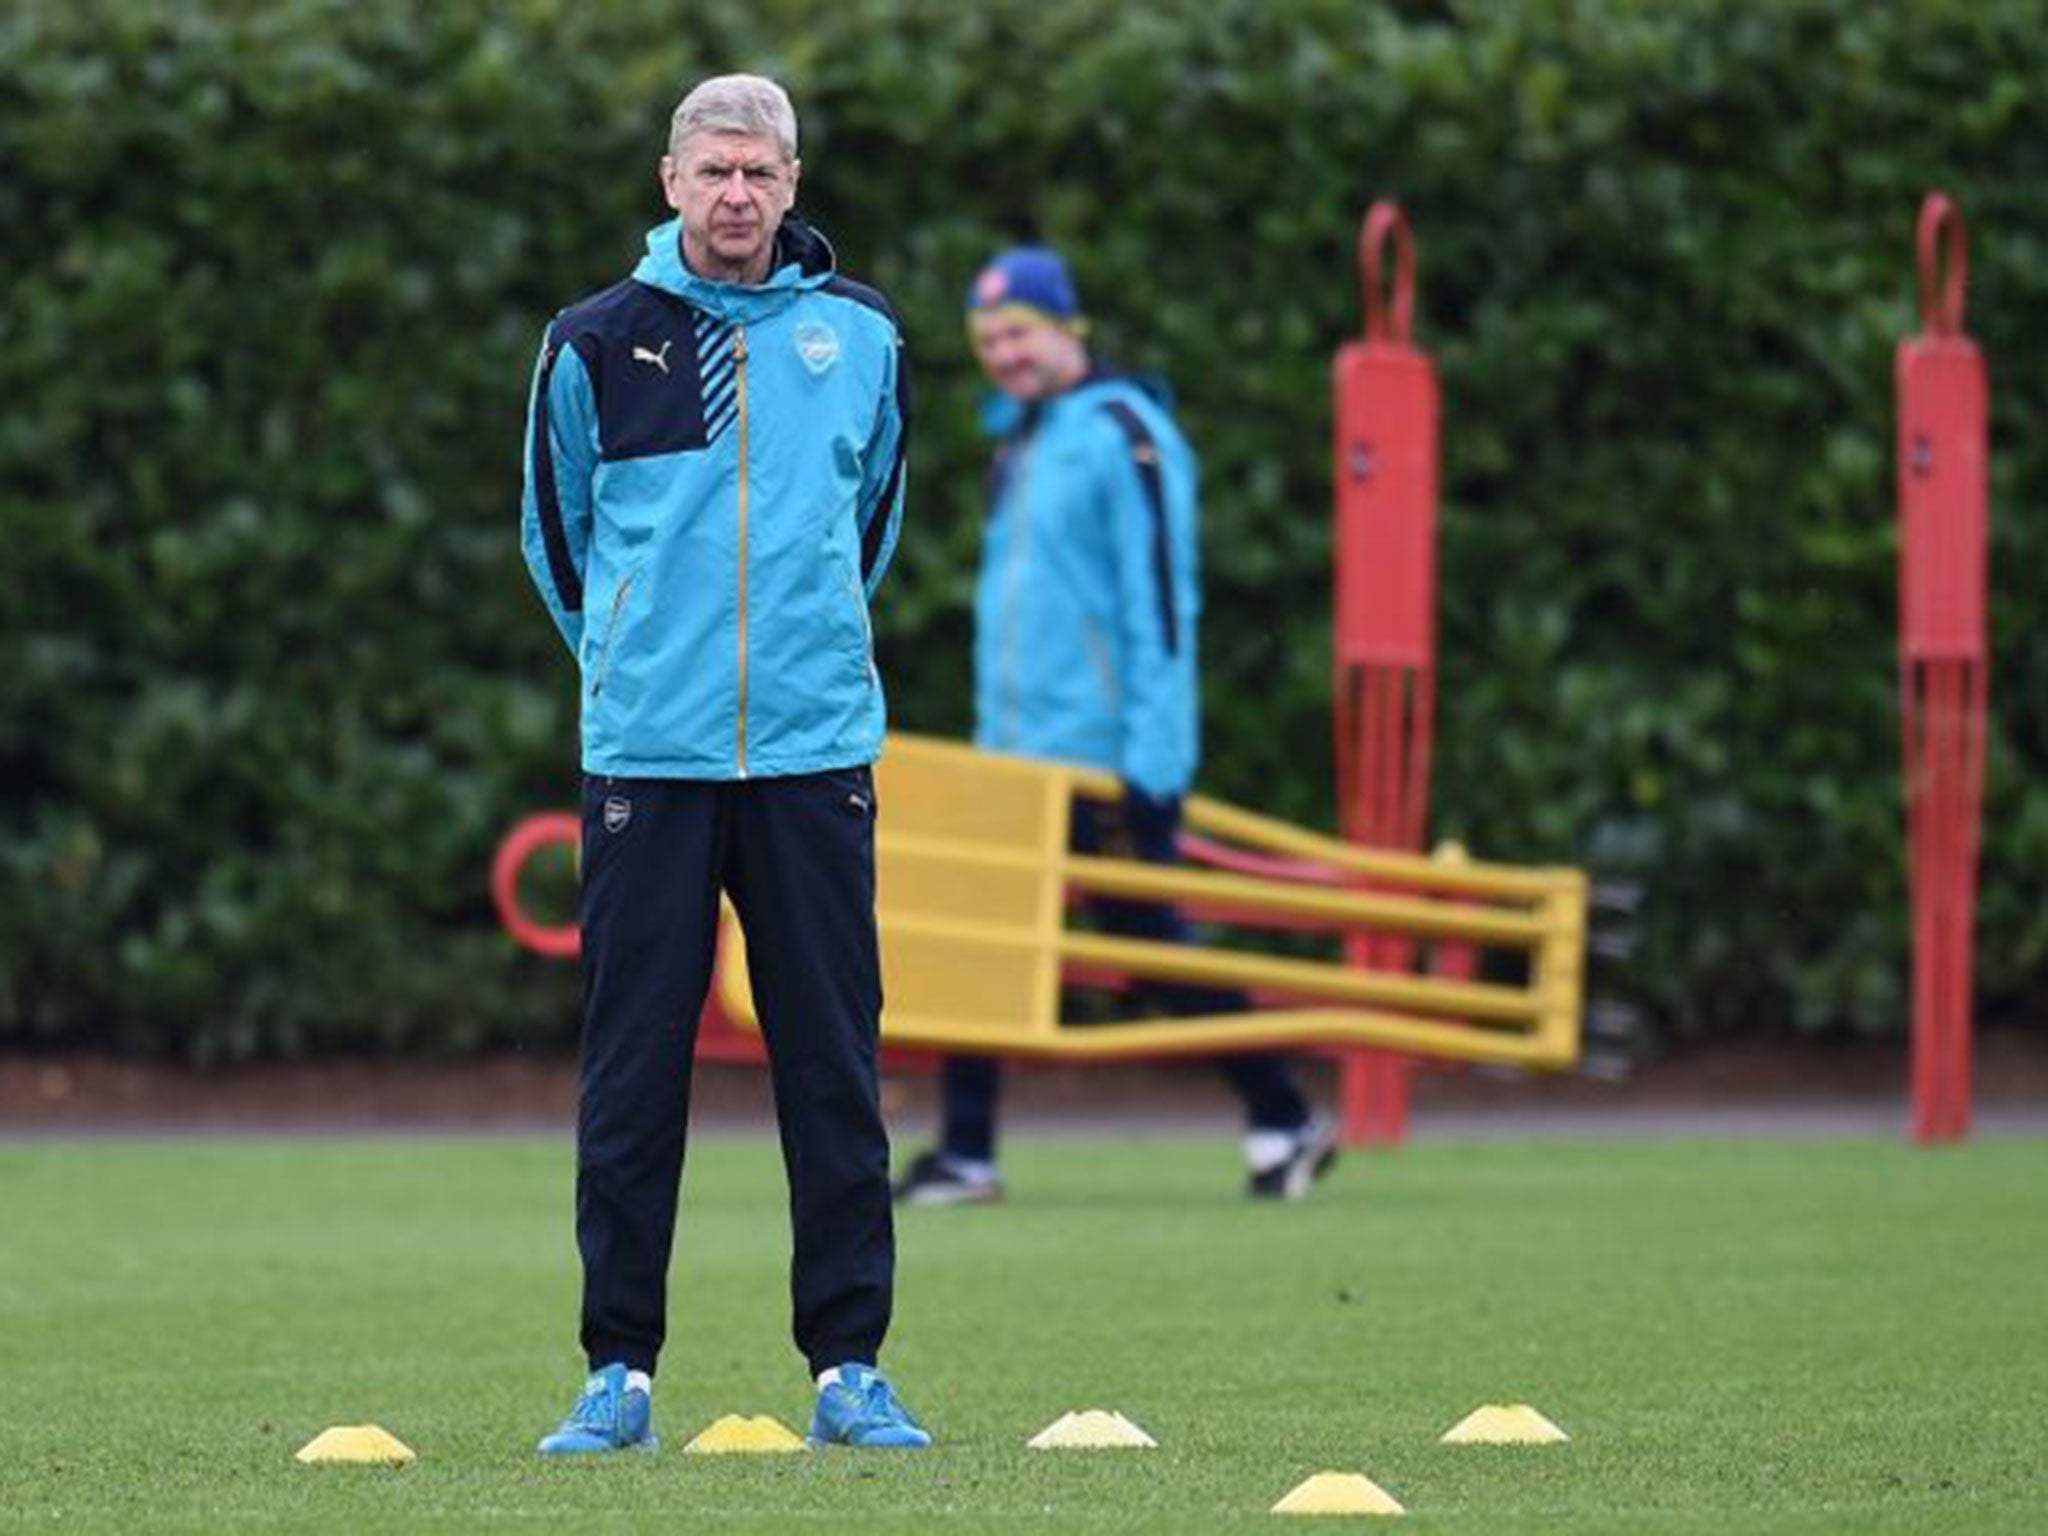 Wenger prepares for the match against Barcelona during Arsenal training on Monday